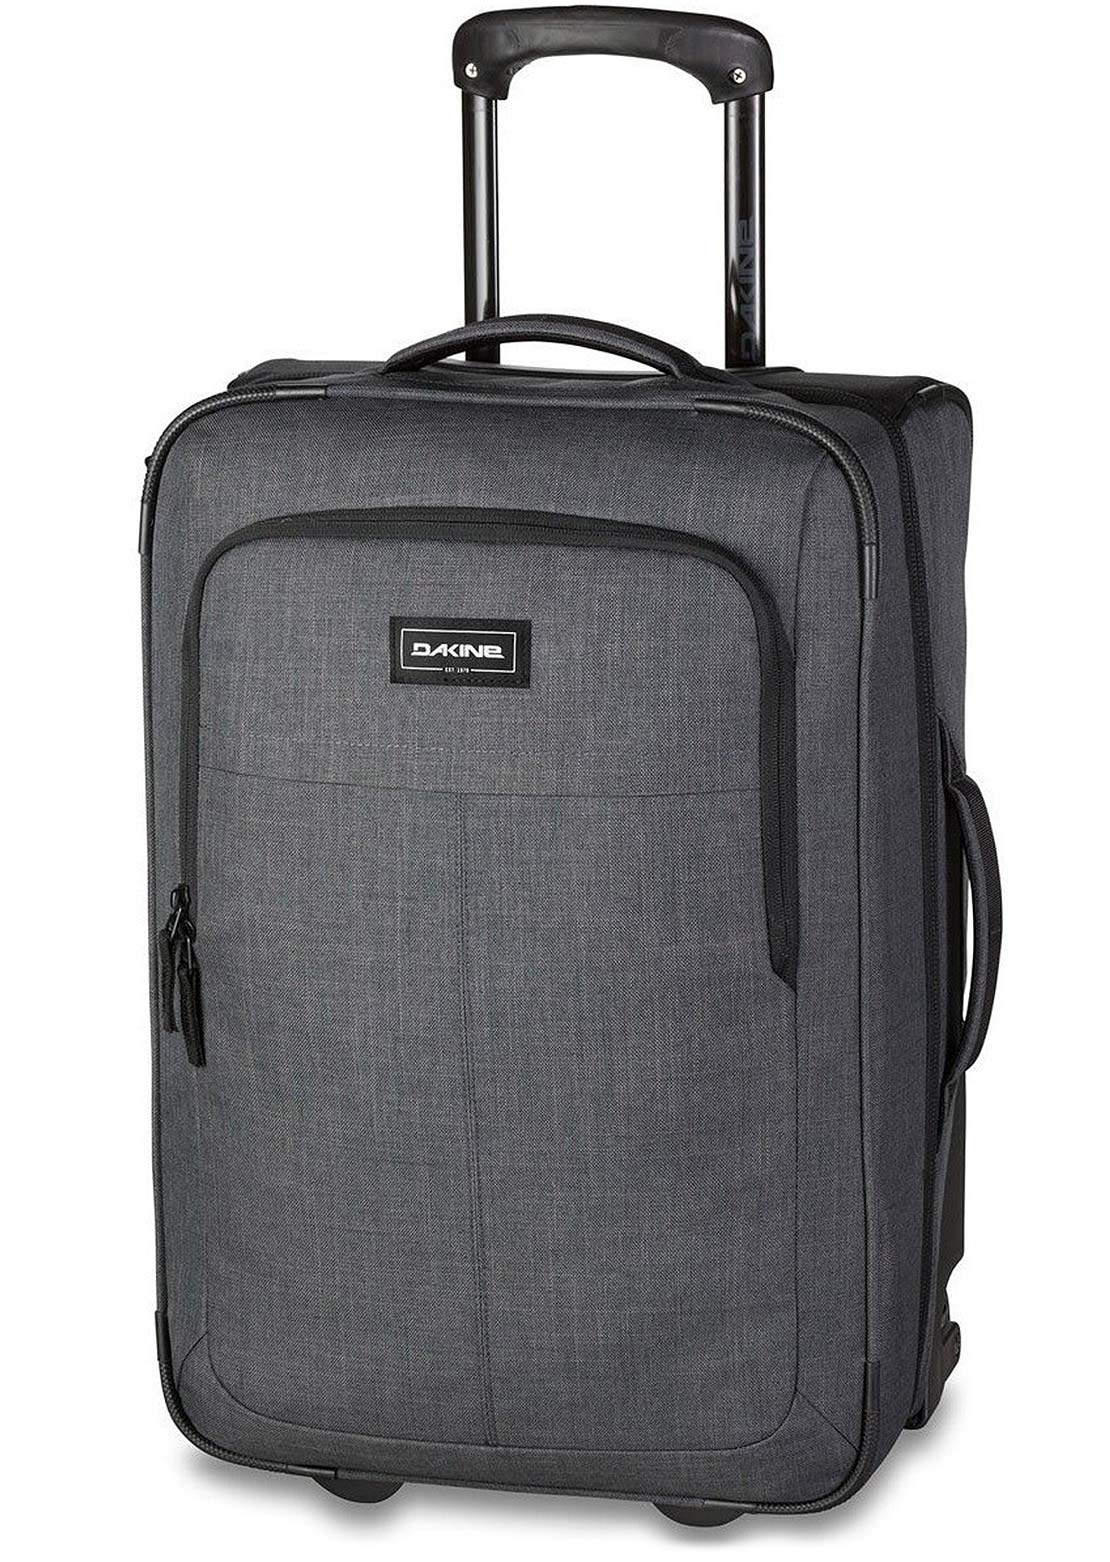 Dakine Carry-On Roller Luggage Carbon